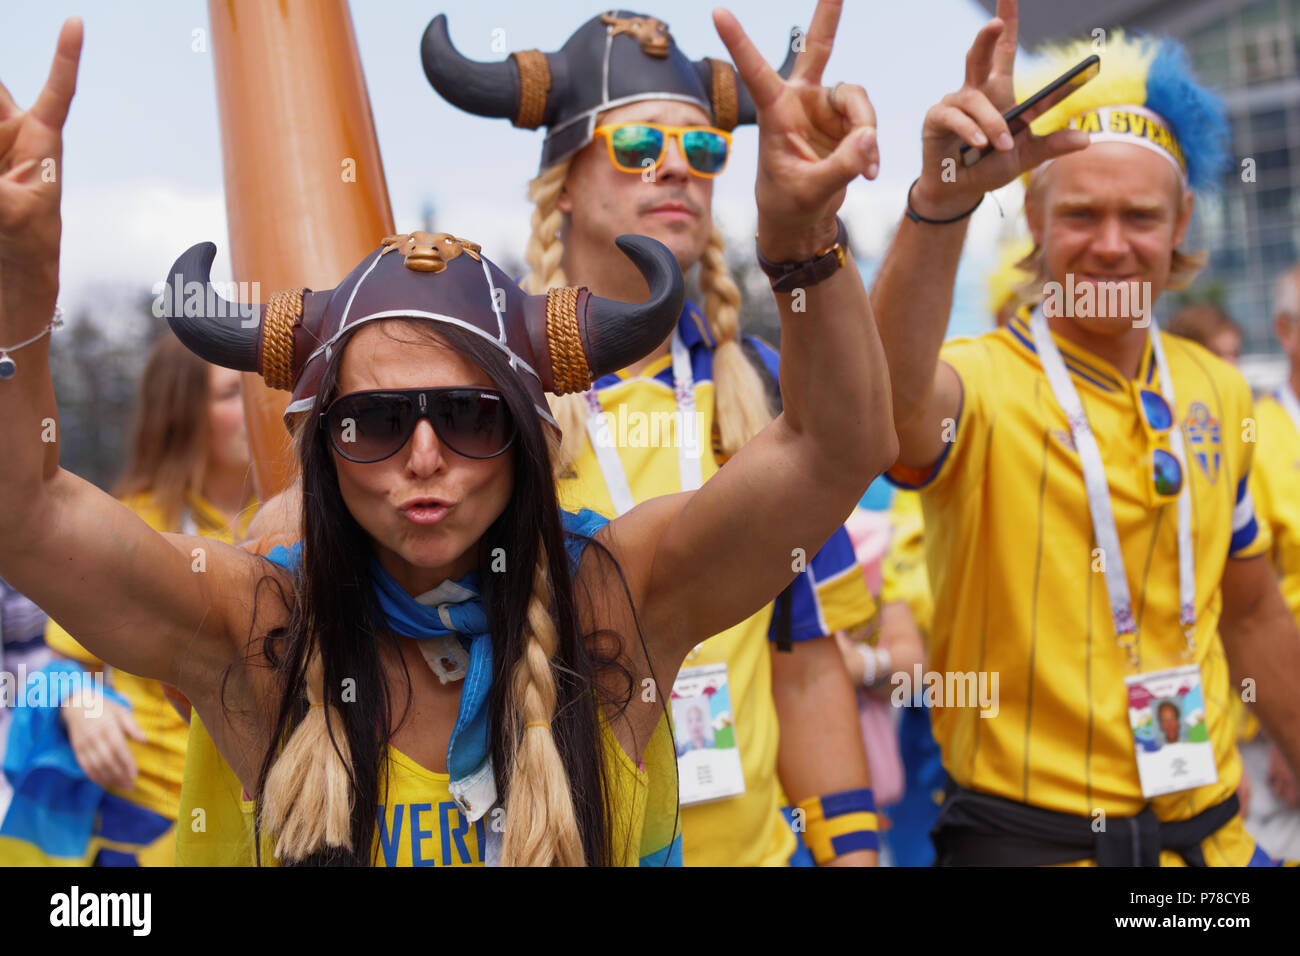 St. Petersburg, Russia - July 3, 2018: Swedish football fans at Saint Petersburg stadium before the match of FIFA World Cup 2018 Sweden vs Switzerland Stock Photo